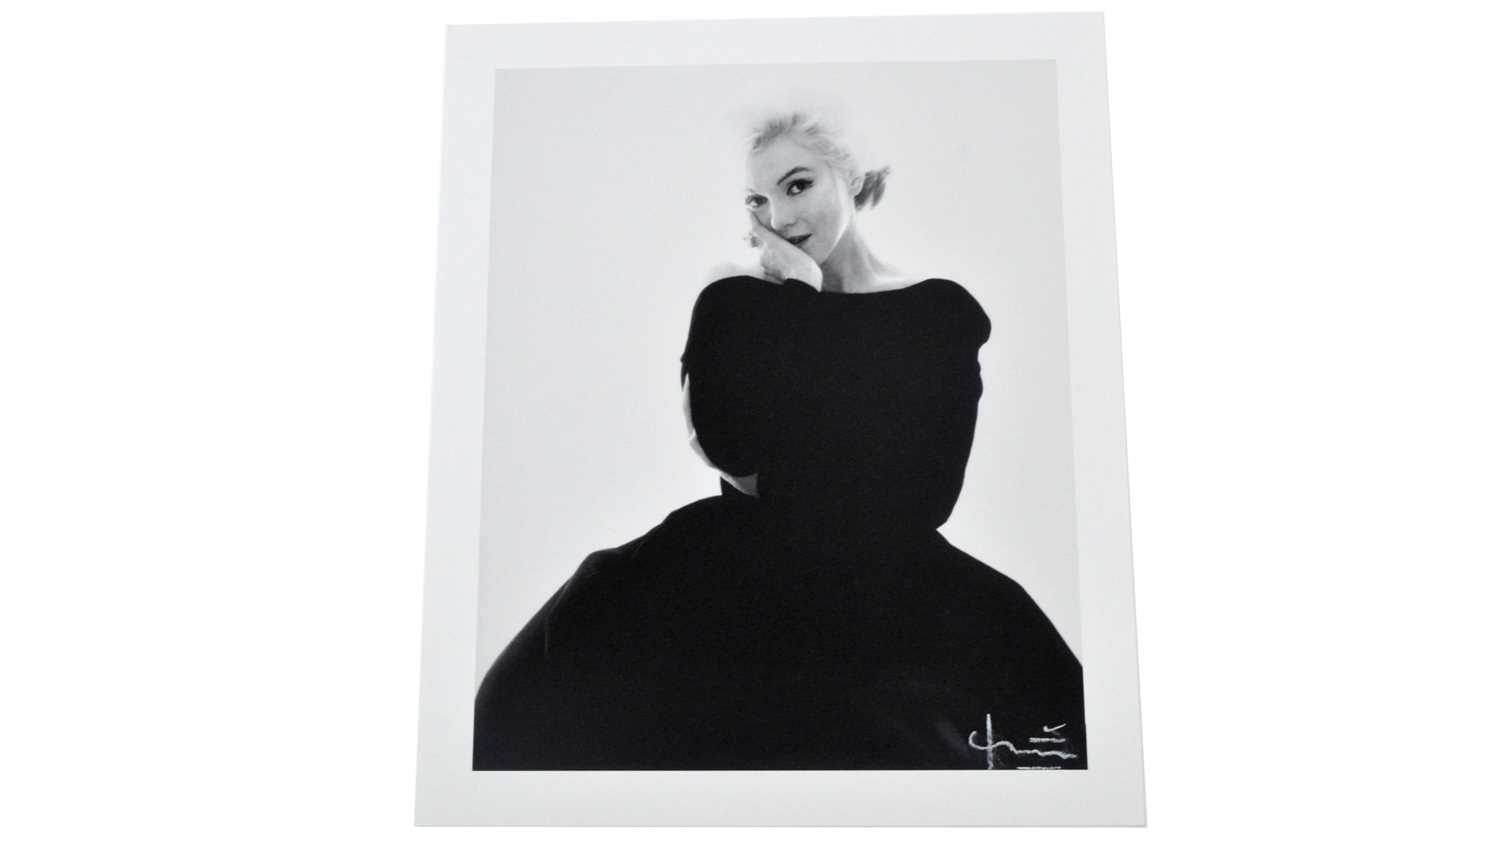 Lot 723 - Bert Stern "Looking at You" photograph of Marilyn Monroe